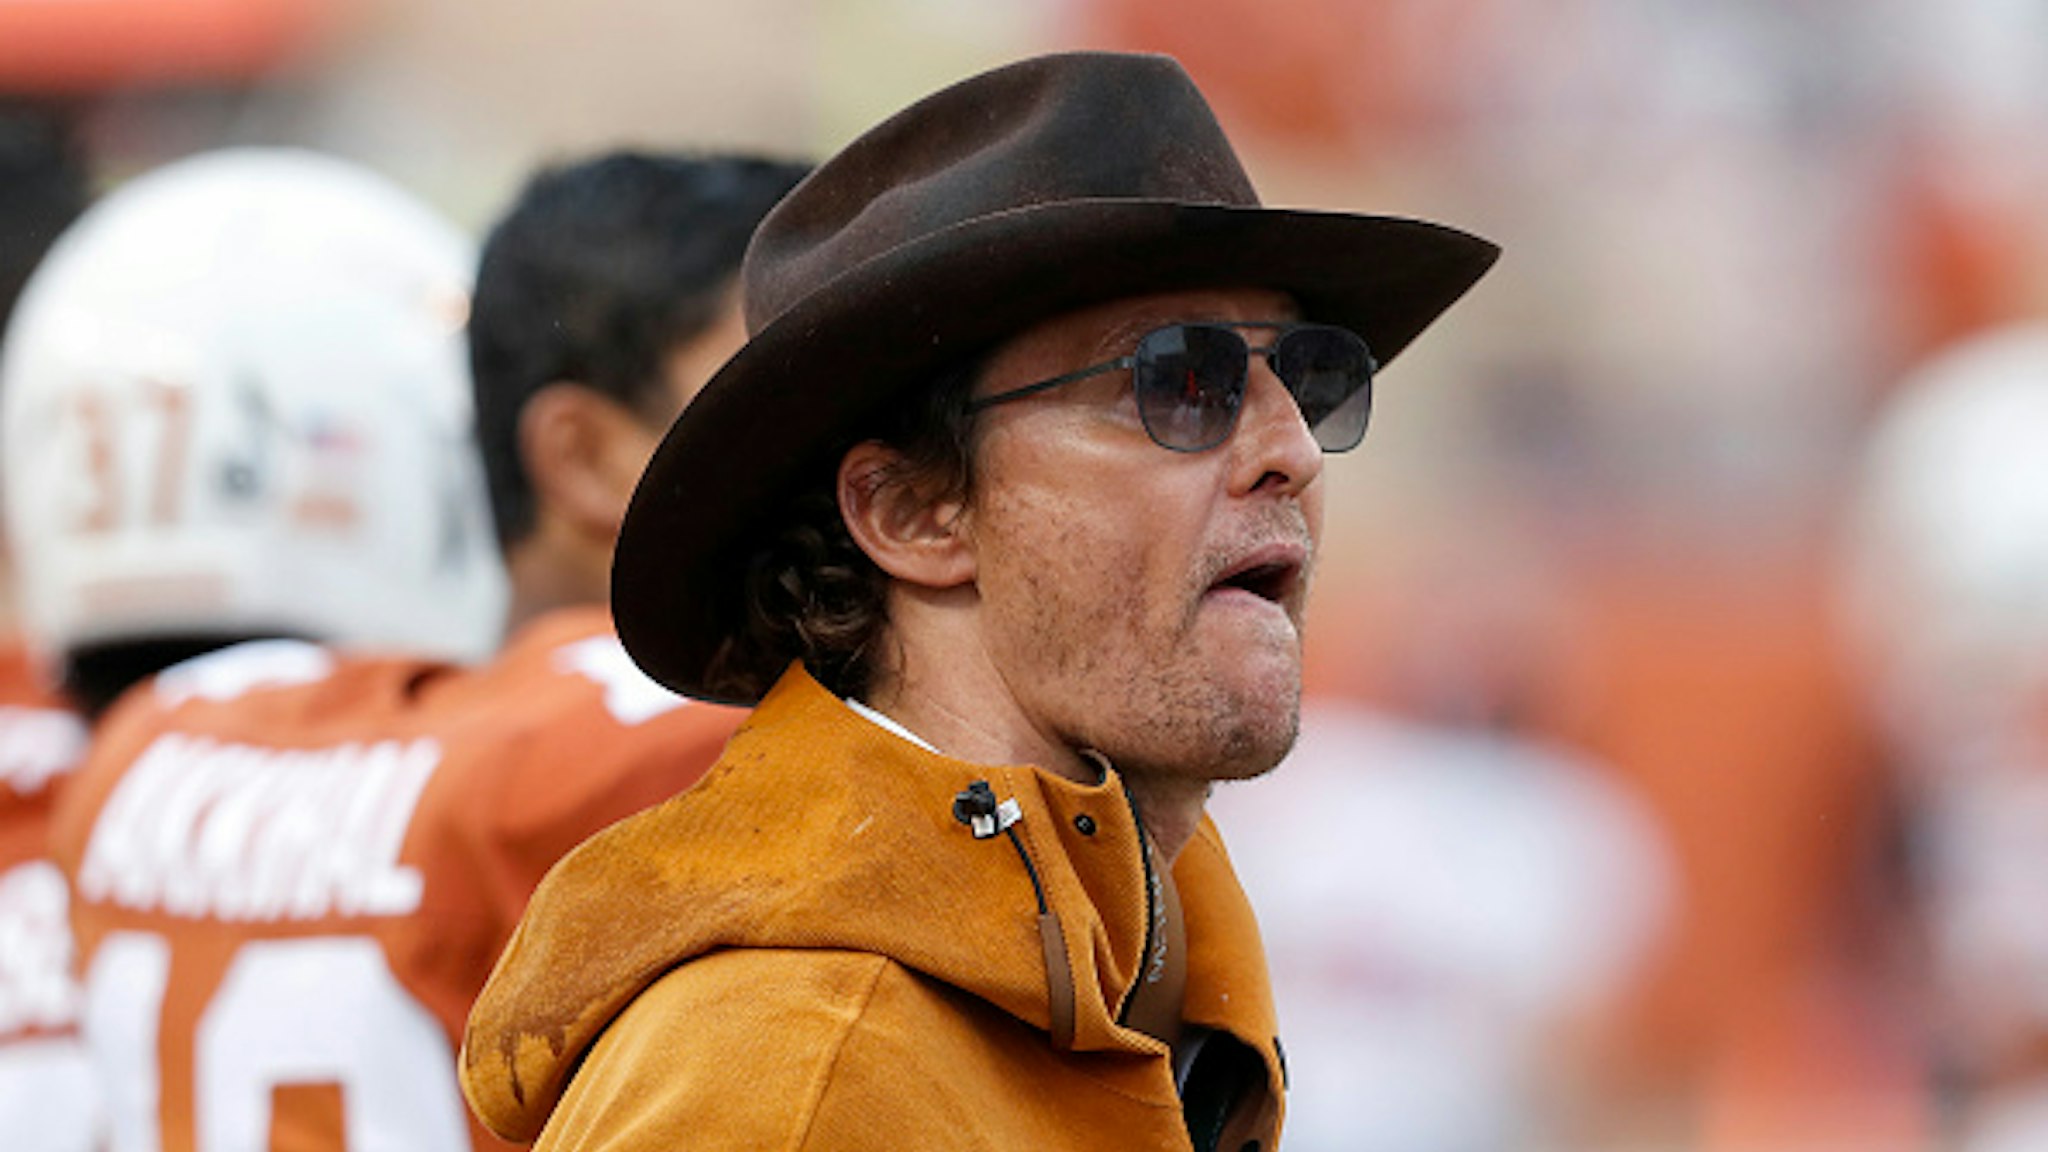 AUSTIN, TX - NOVEMBER 29: Actor Matthew McConaughey watches on the Texas Longhorns sideline in the second half against the Texas Tech Red Raiders at Darrell K Royal-Texas Memorial Stadium on November 29, 2019 in Austin, Texas.